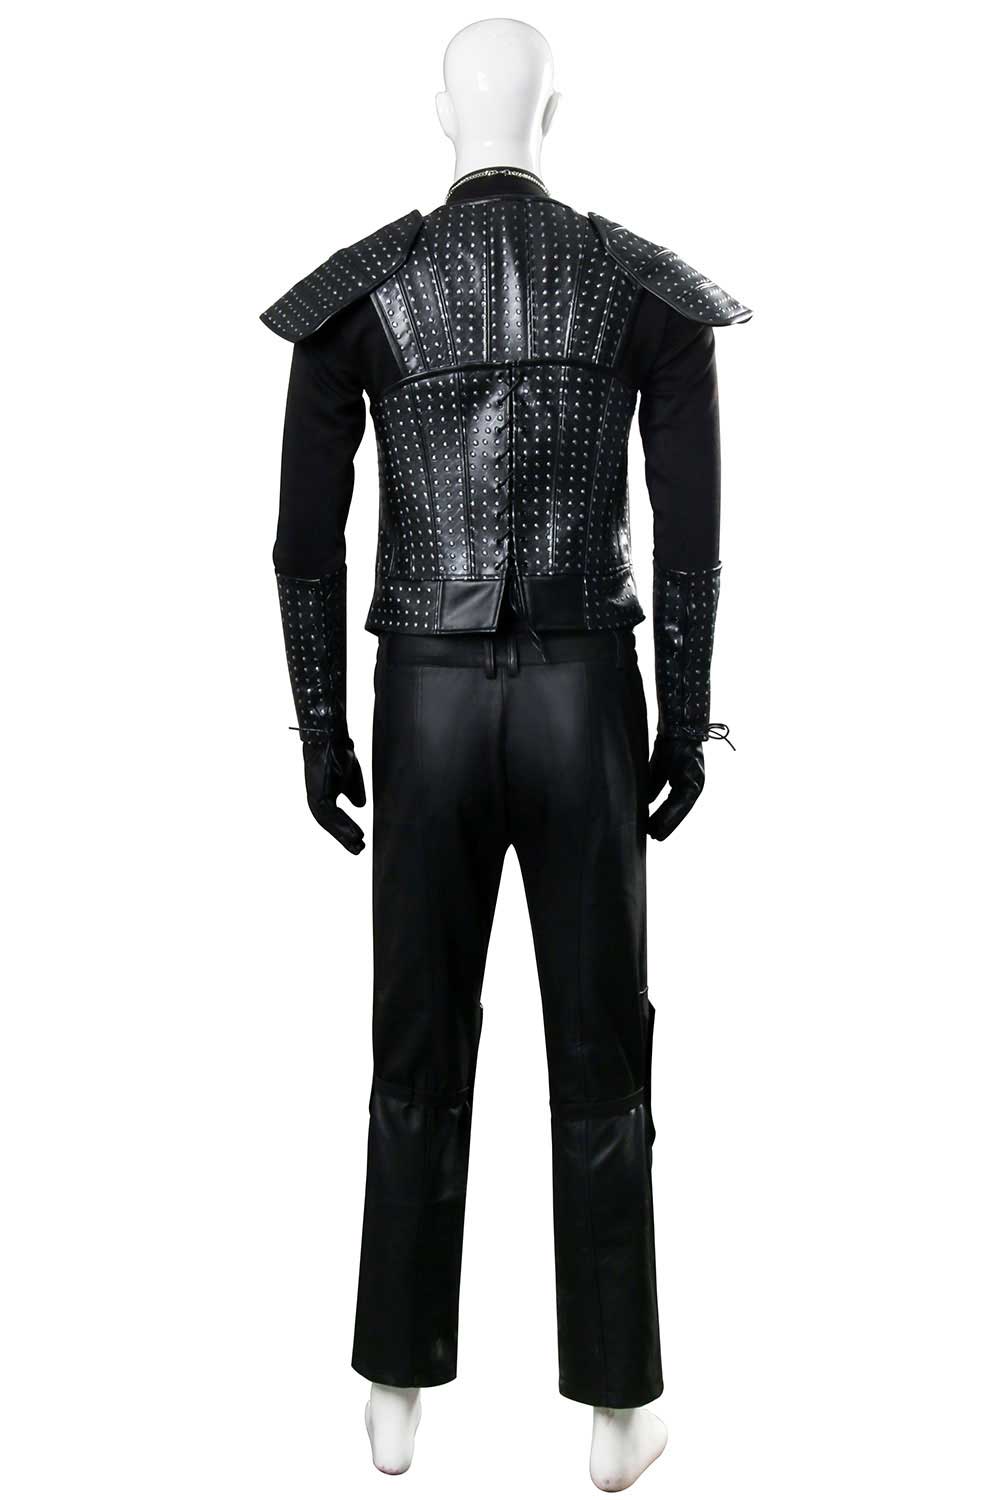 The Witcher 3 Cavill Geralt of Rivia Uniform Cosplay Costume